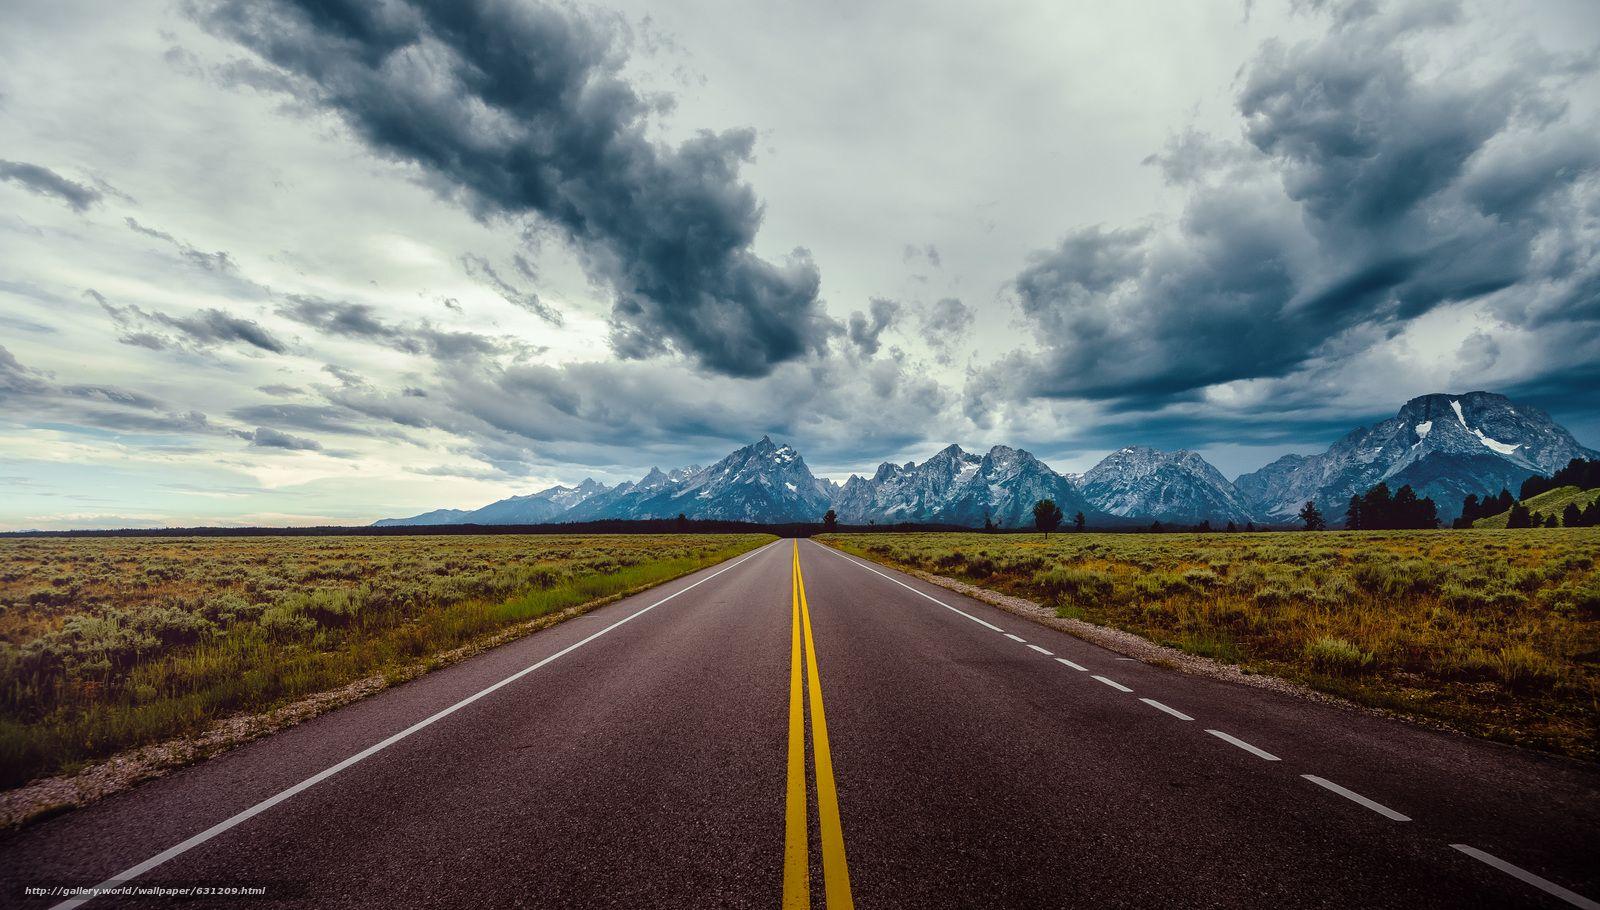 Download wallpaper Yellowstone National Park, road, Mountains